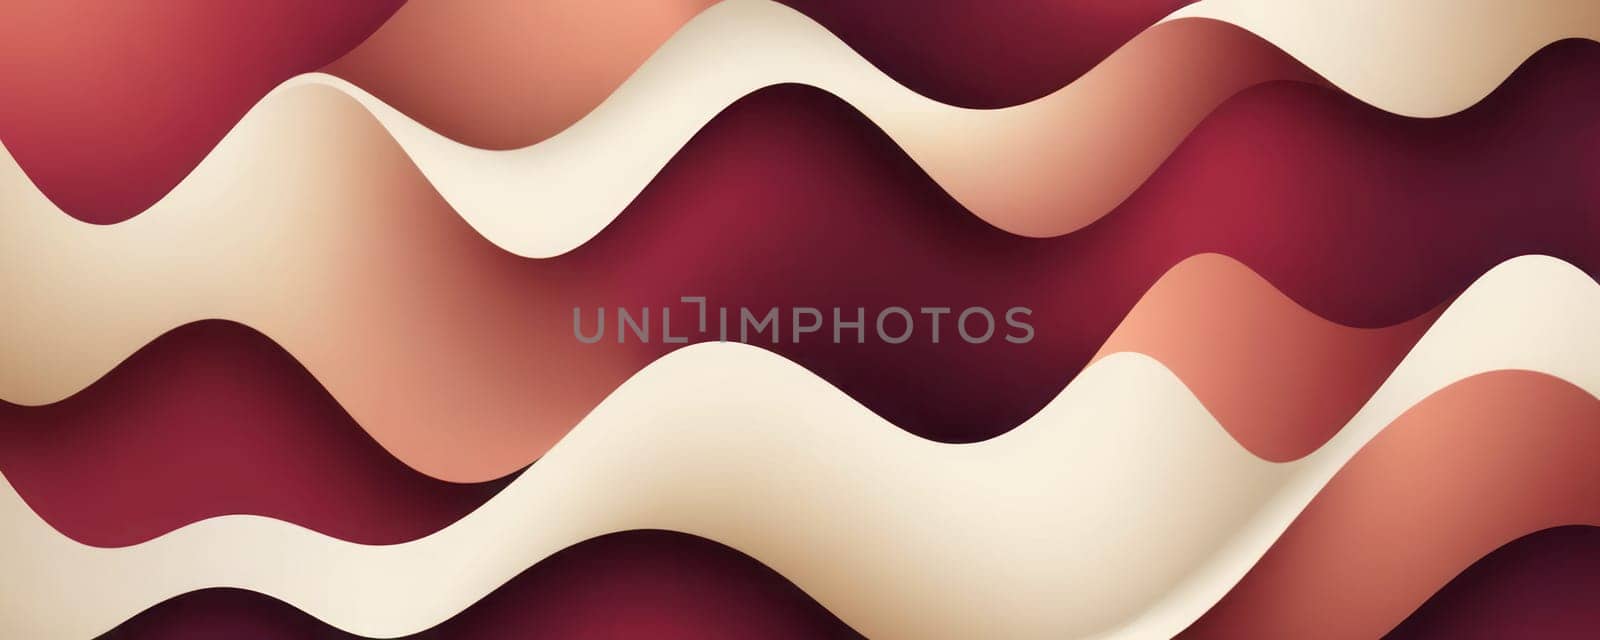 Freeform Shapes in Maroon and Antique white by nkotlyar